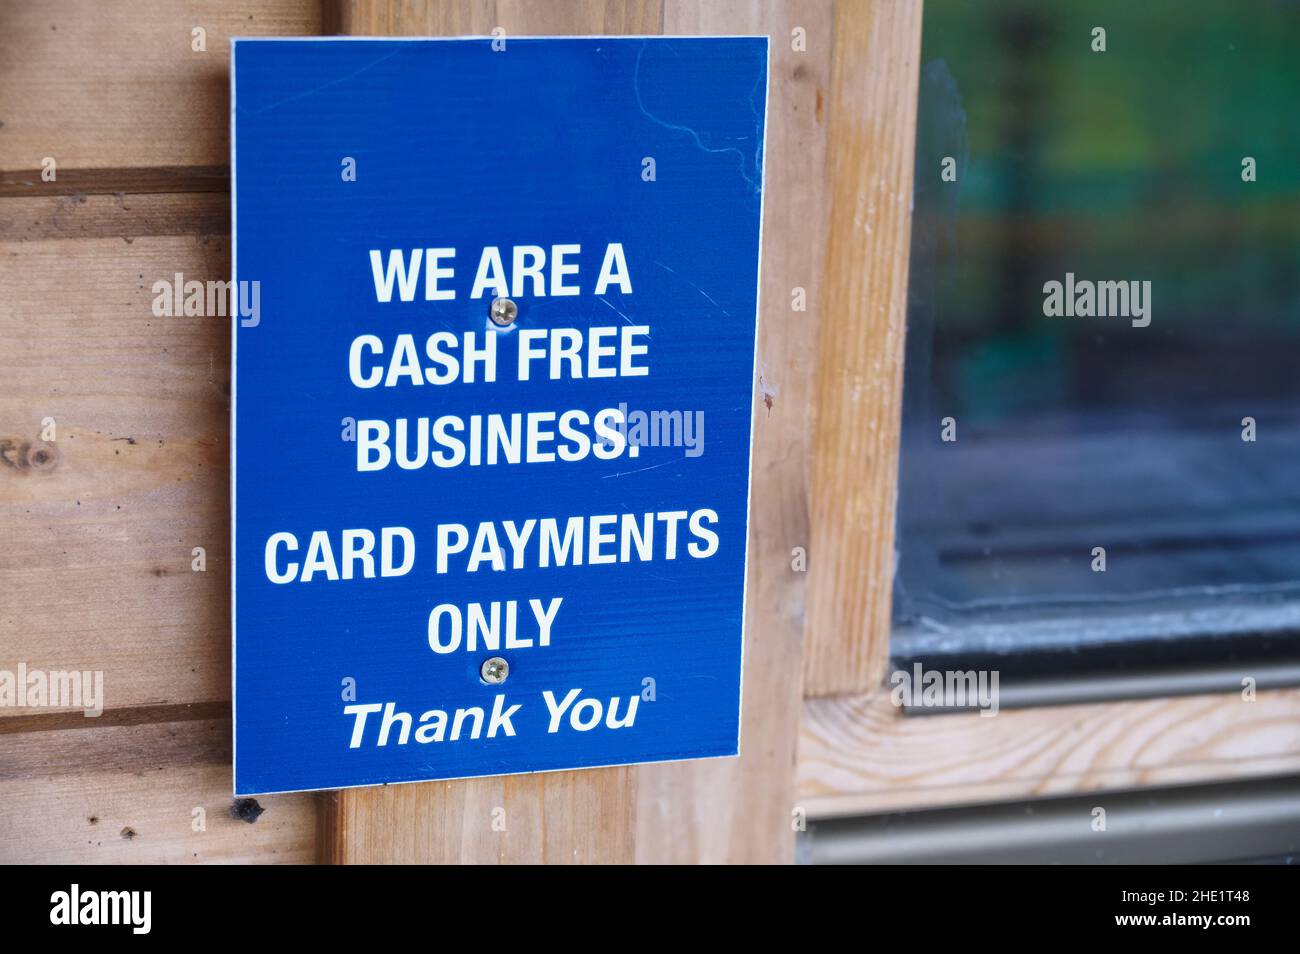 Cash free business card payments only sign Stock Photo